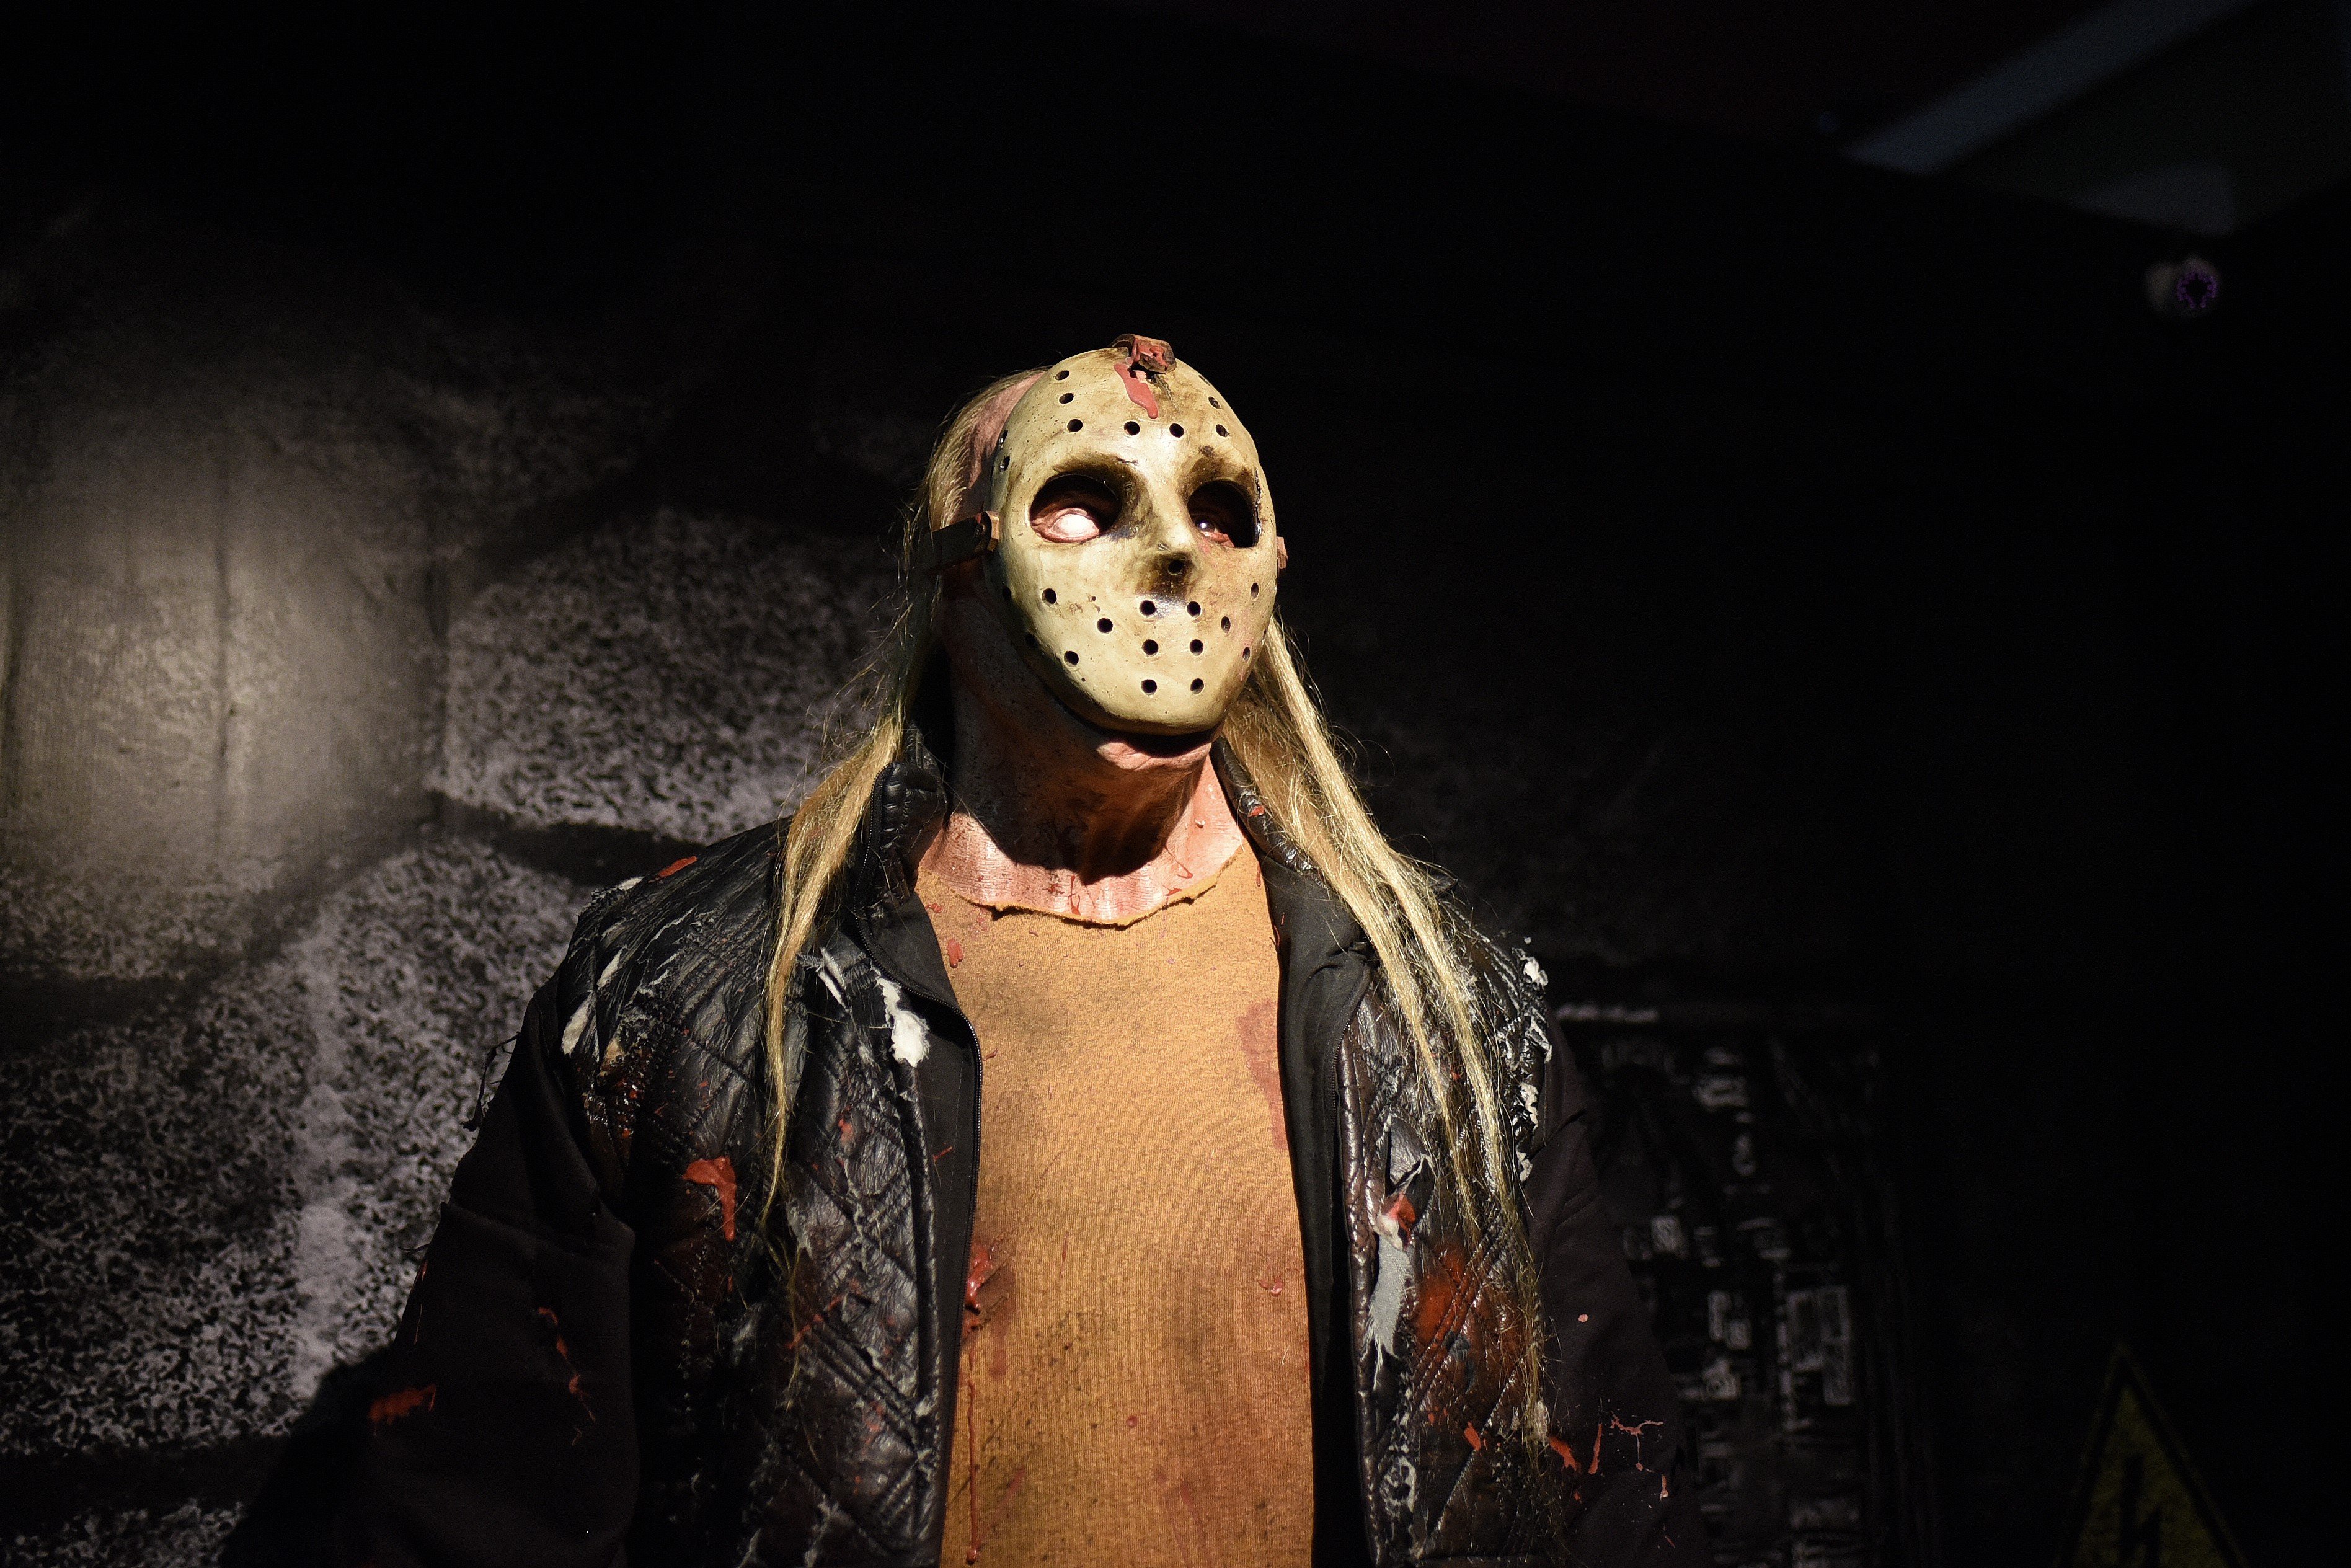 A wax figure of Jason Vorhees with long hair